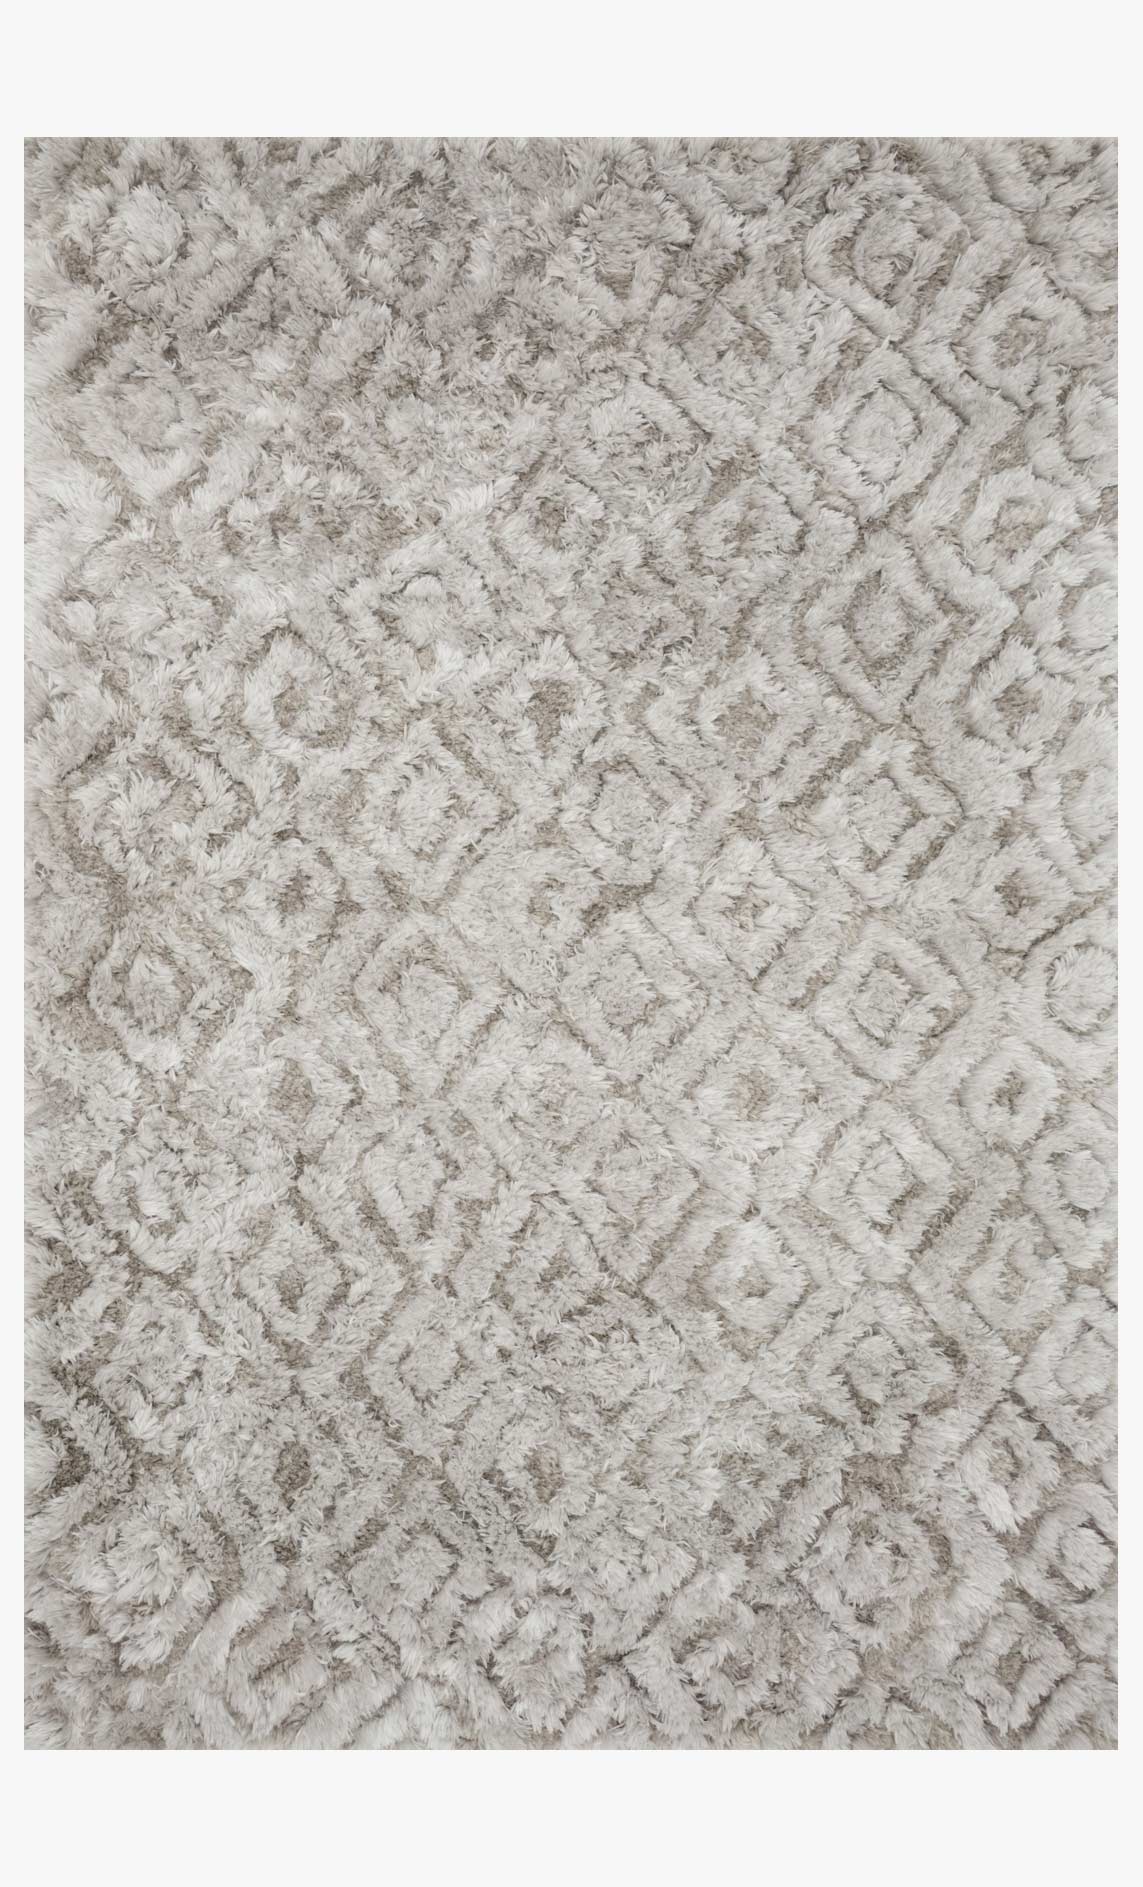 Caspia Rug in Silver by Justina Blakeney for Loloi